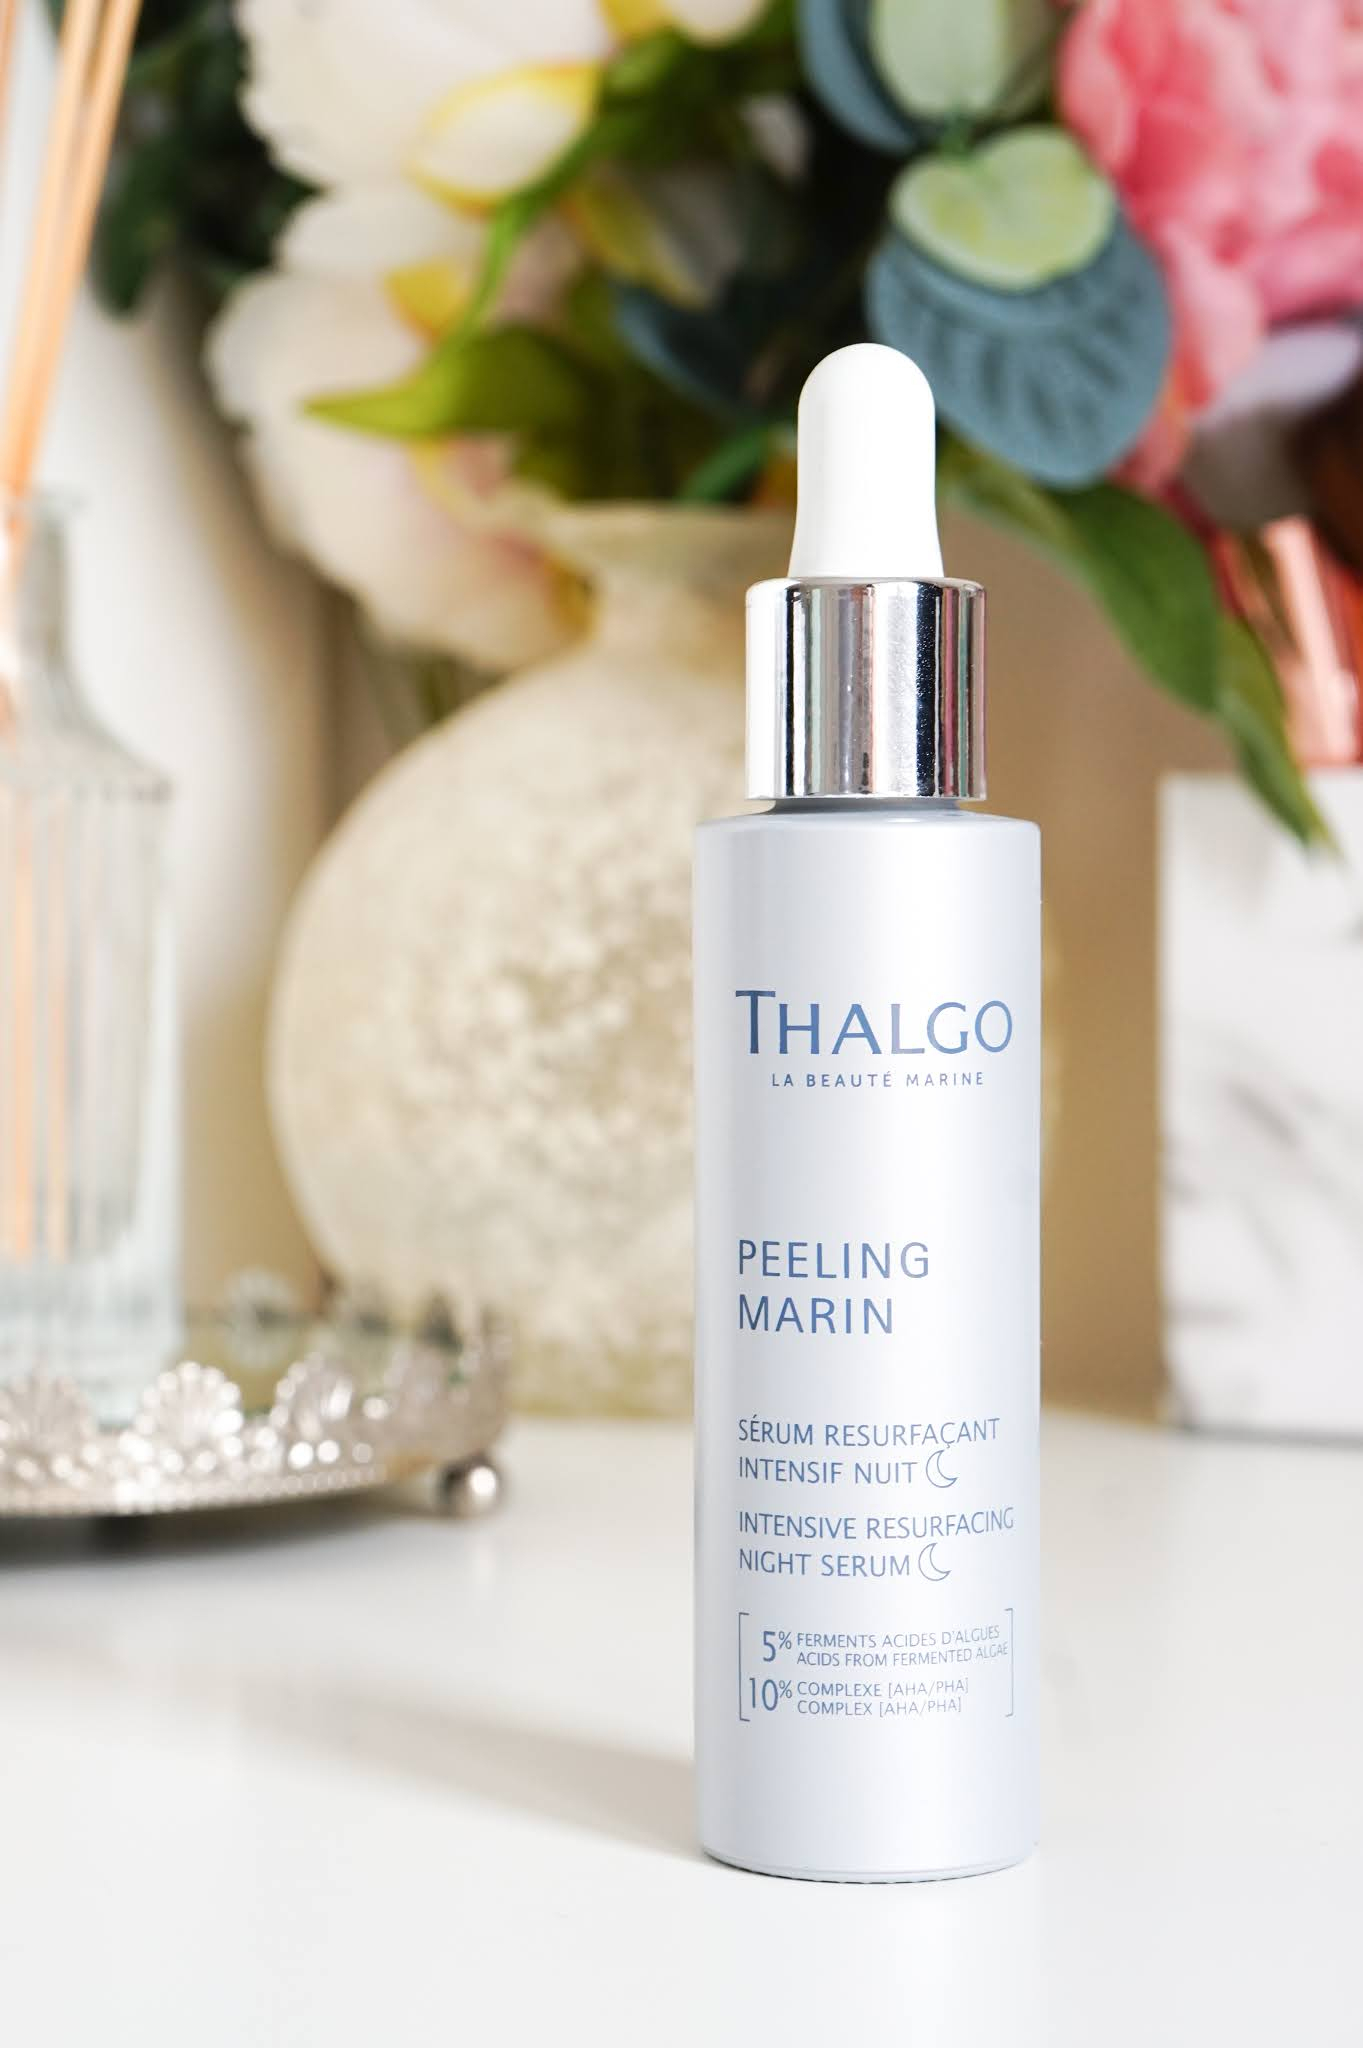 Beauty On Review: Review: Peeling Marin Treatment At tout Thalgo Serum 